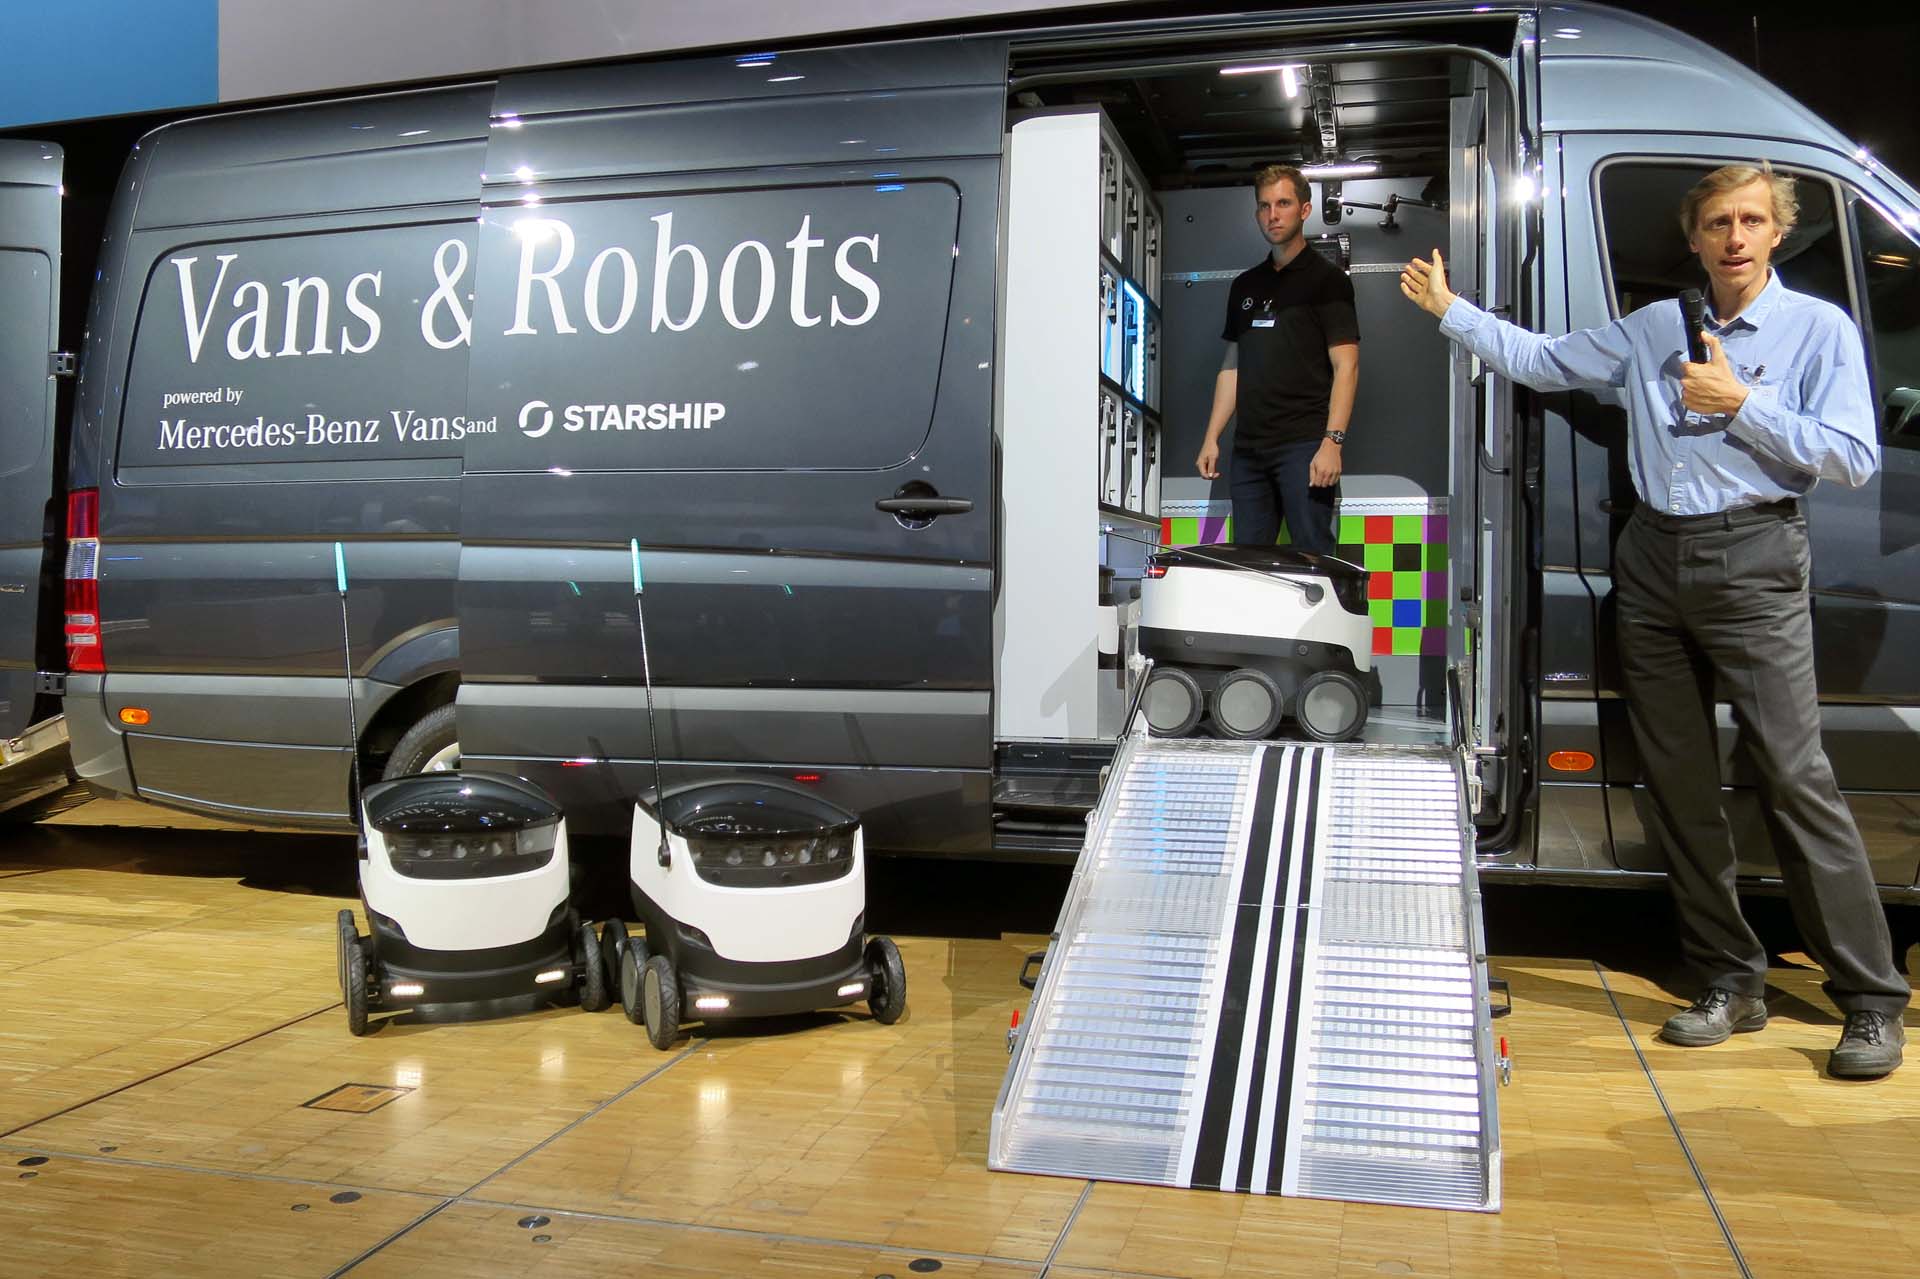 A project in conjunction with Starship Technologies sends a Sprinter equipped with robots to a central area, with the robots making the final delivery of small parcels.